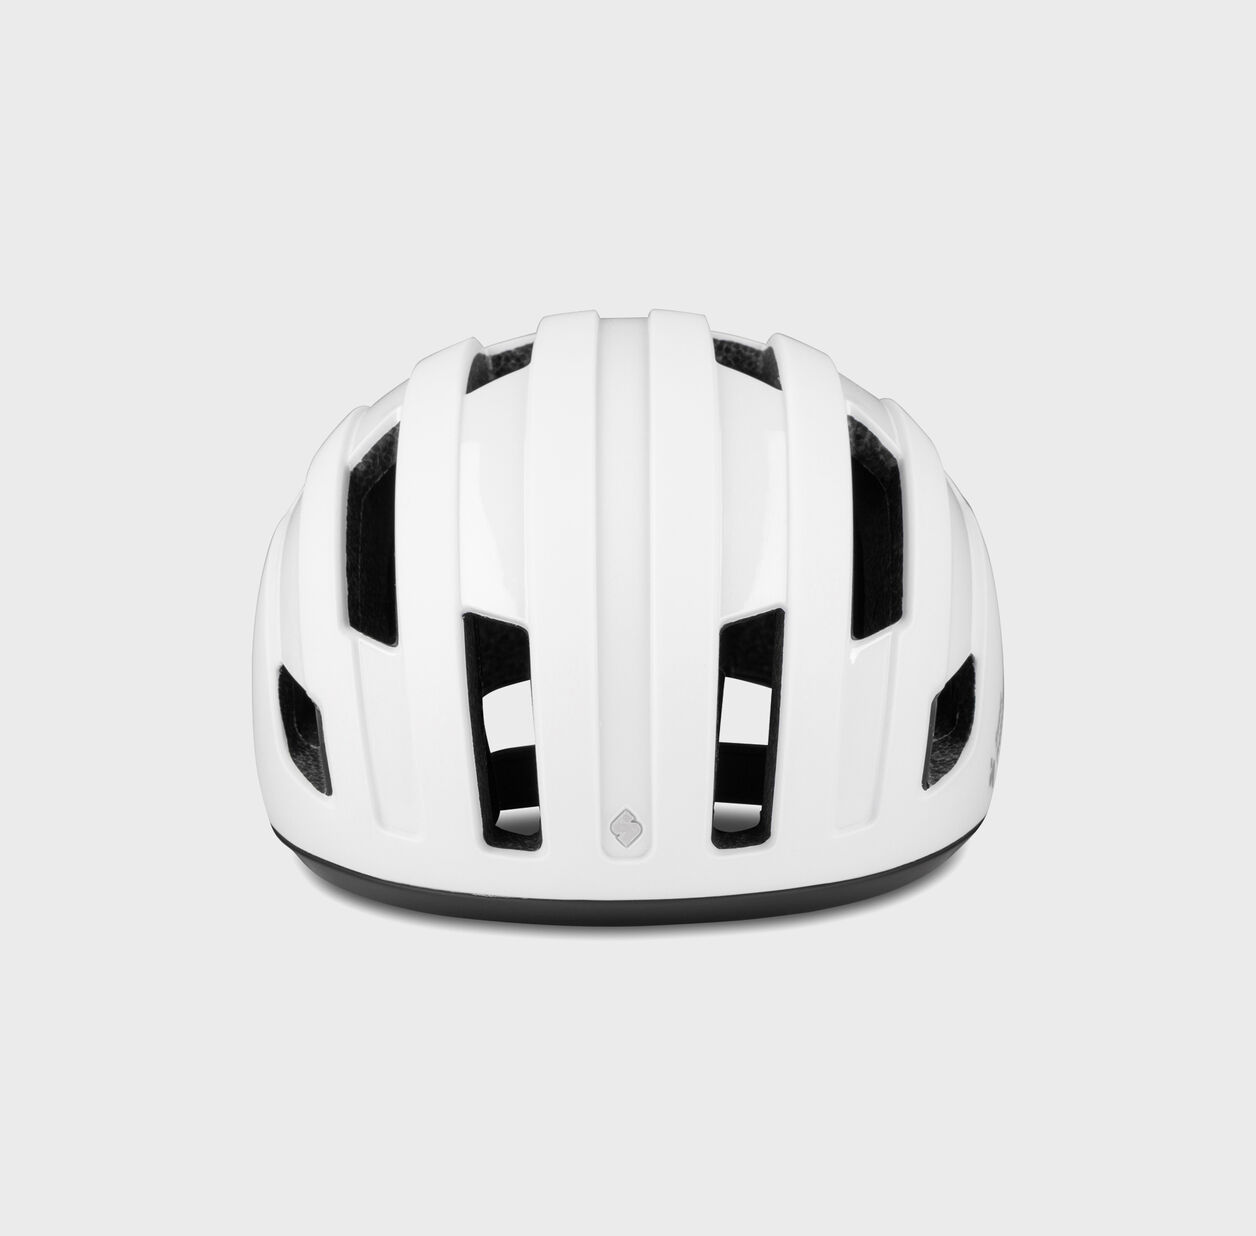 845081_Outrider-Helmet_MWHTE_PRODUCT_3_Sweetprotection